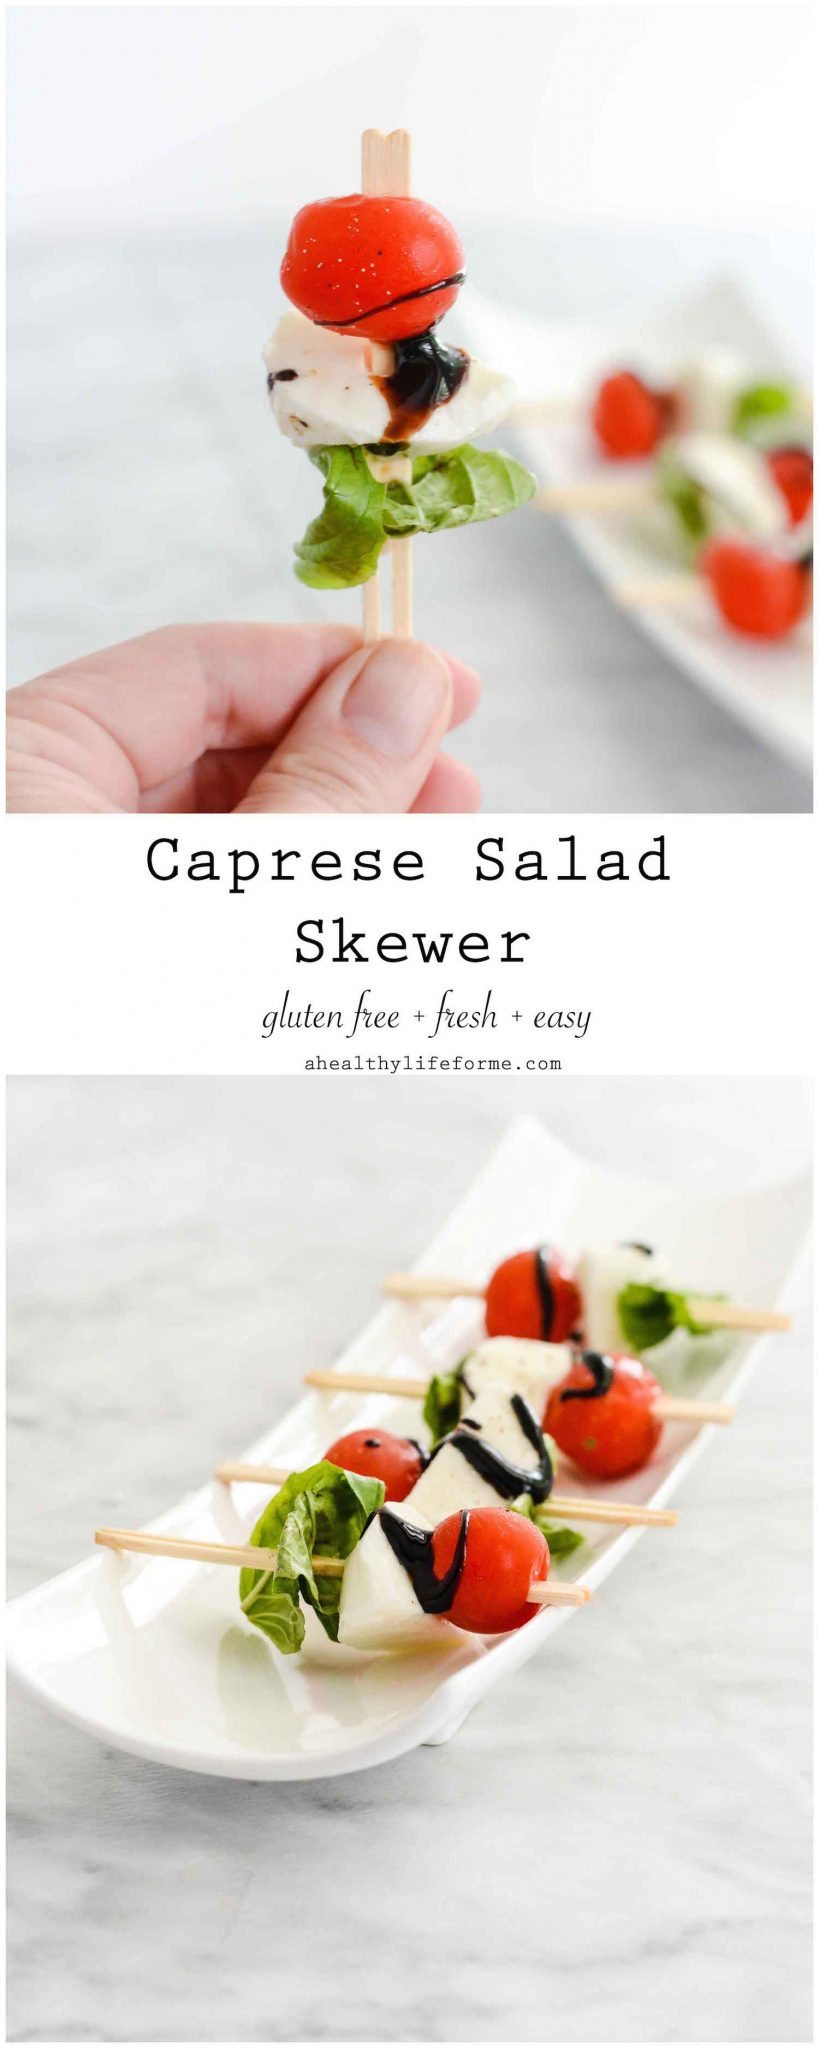 Caprese Salad Skewers are a delicious, easy, gluten free appetizer recipe. Tomato fresh mozzarela basil and balsamic glaze | ahealthylifeforme.com